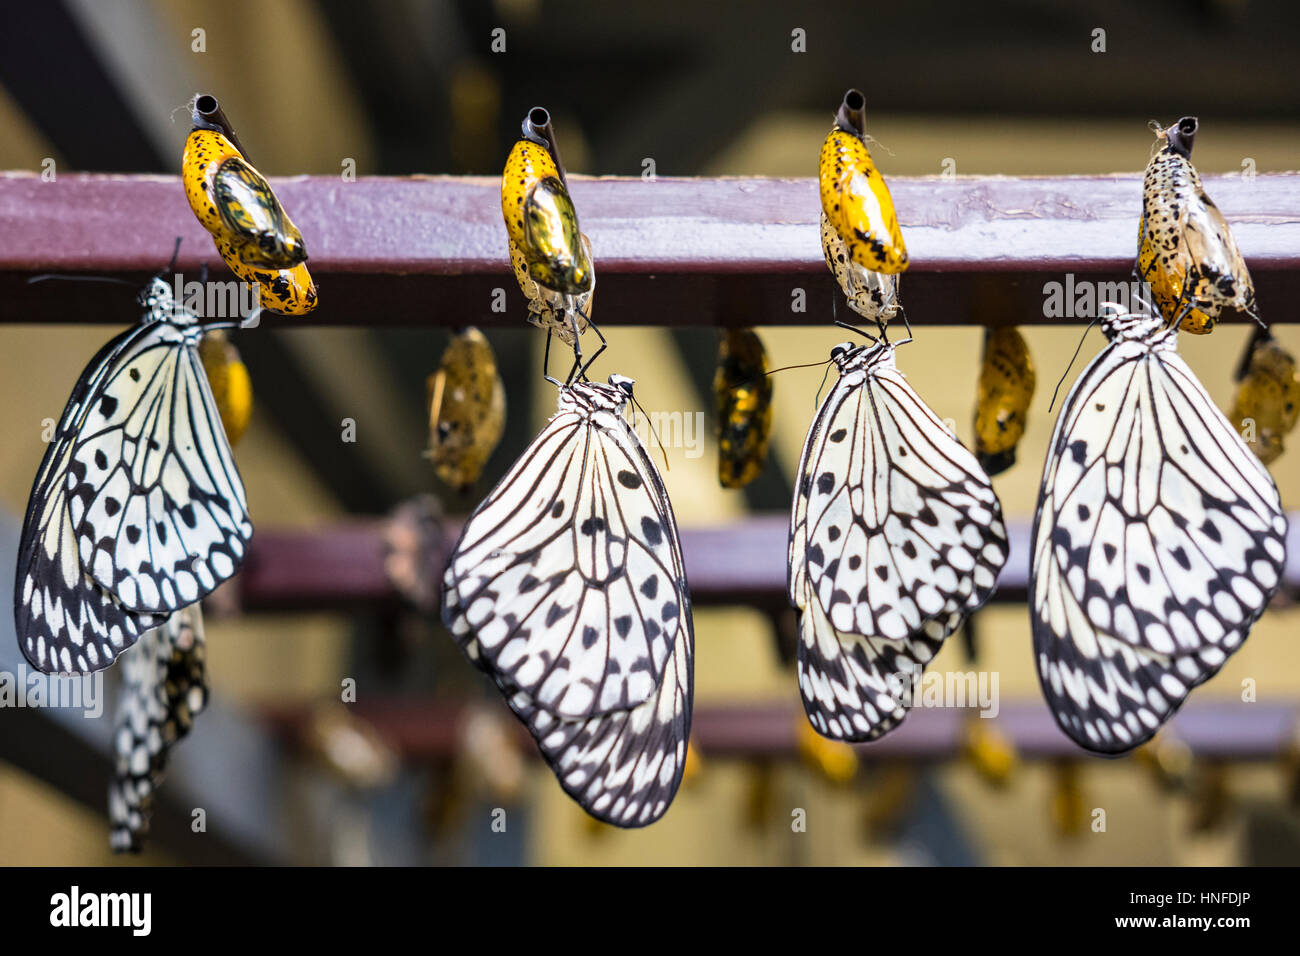 Rice paper butterflies (Idea leuconoe) recently emerged from chrysalides / chrysalis in incubator in the Cambridge Butterfly Conservatory, Ontario. Stock Photo